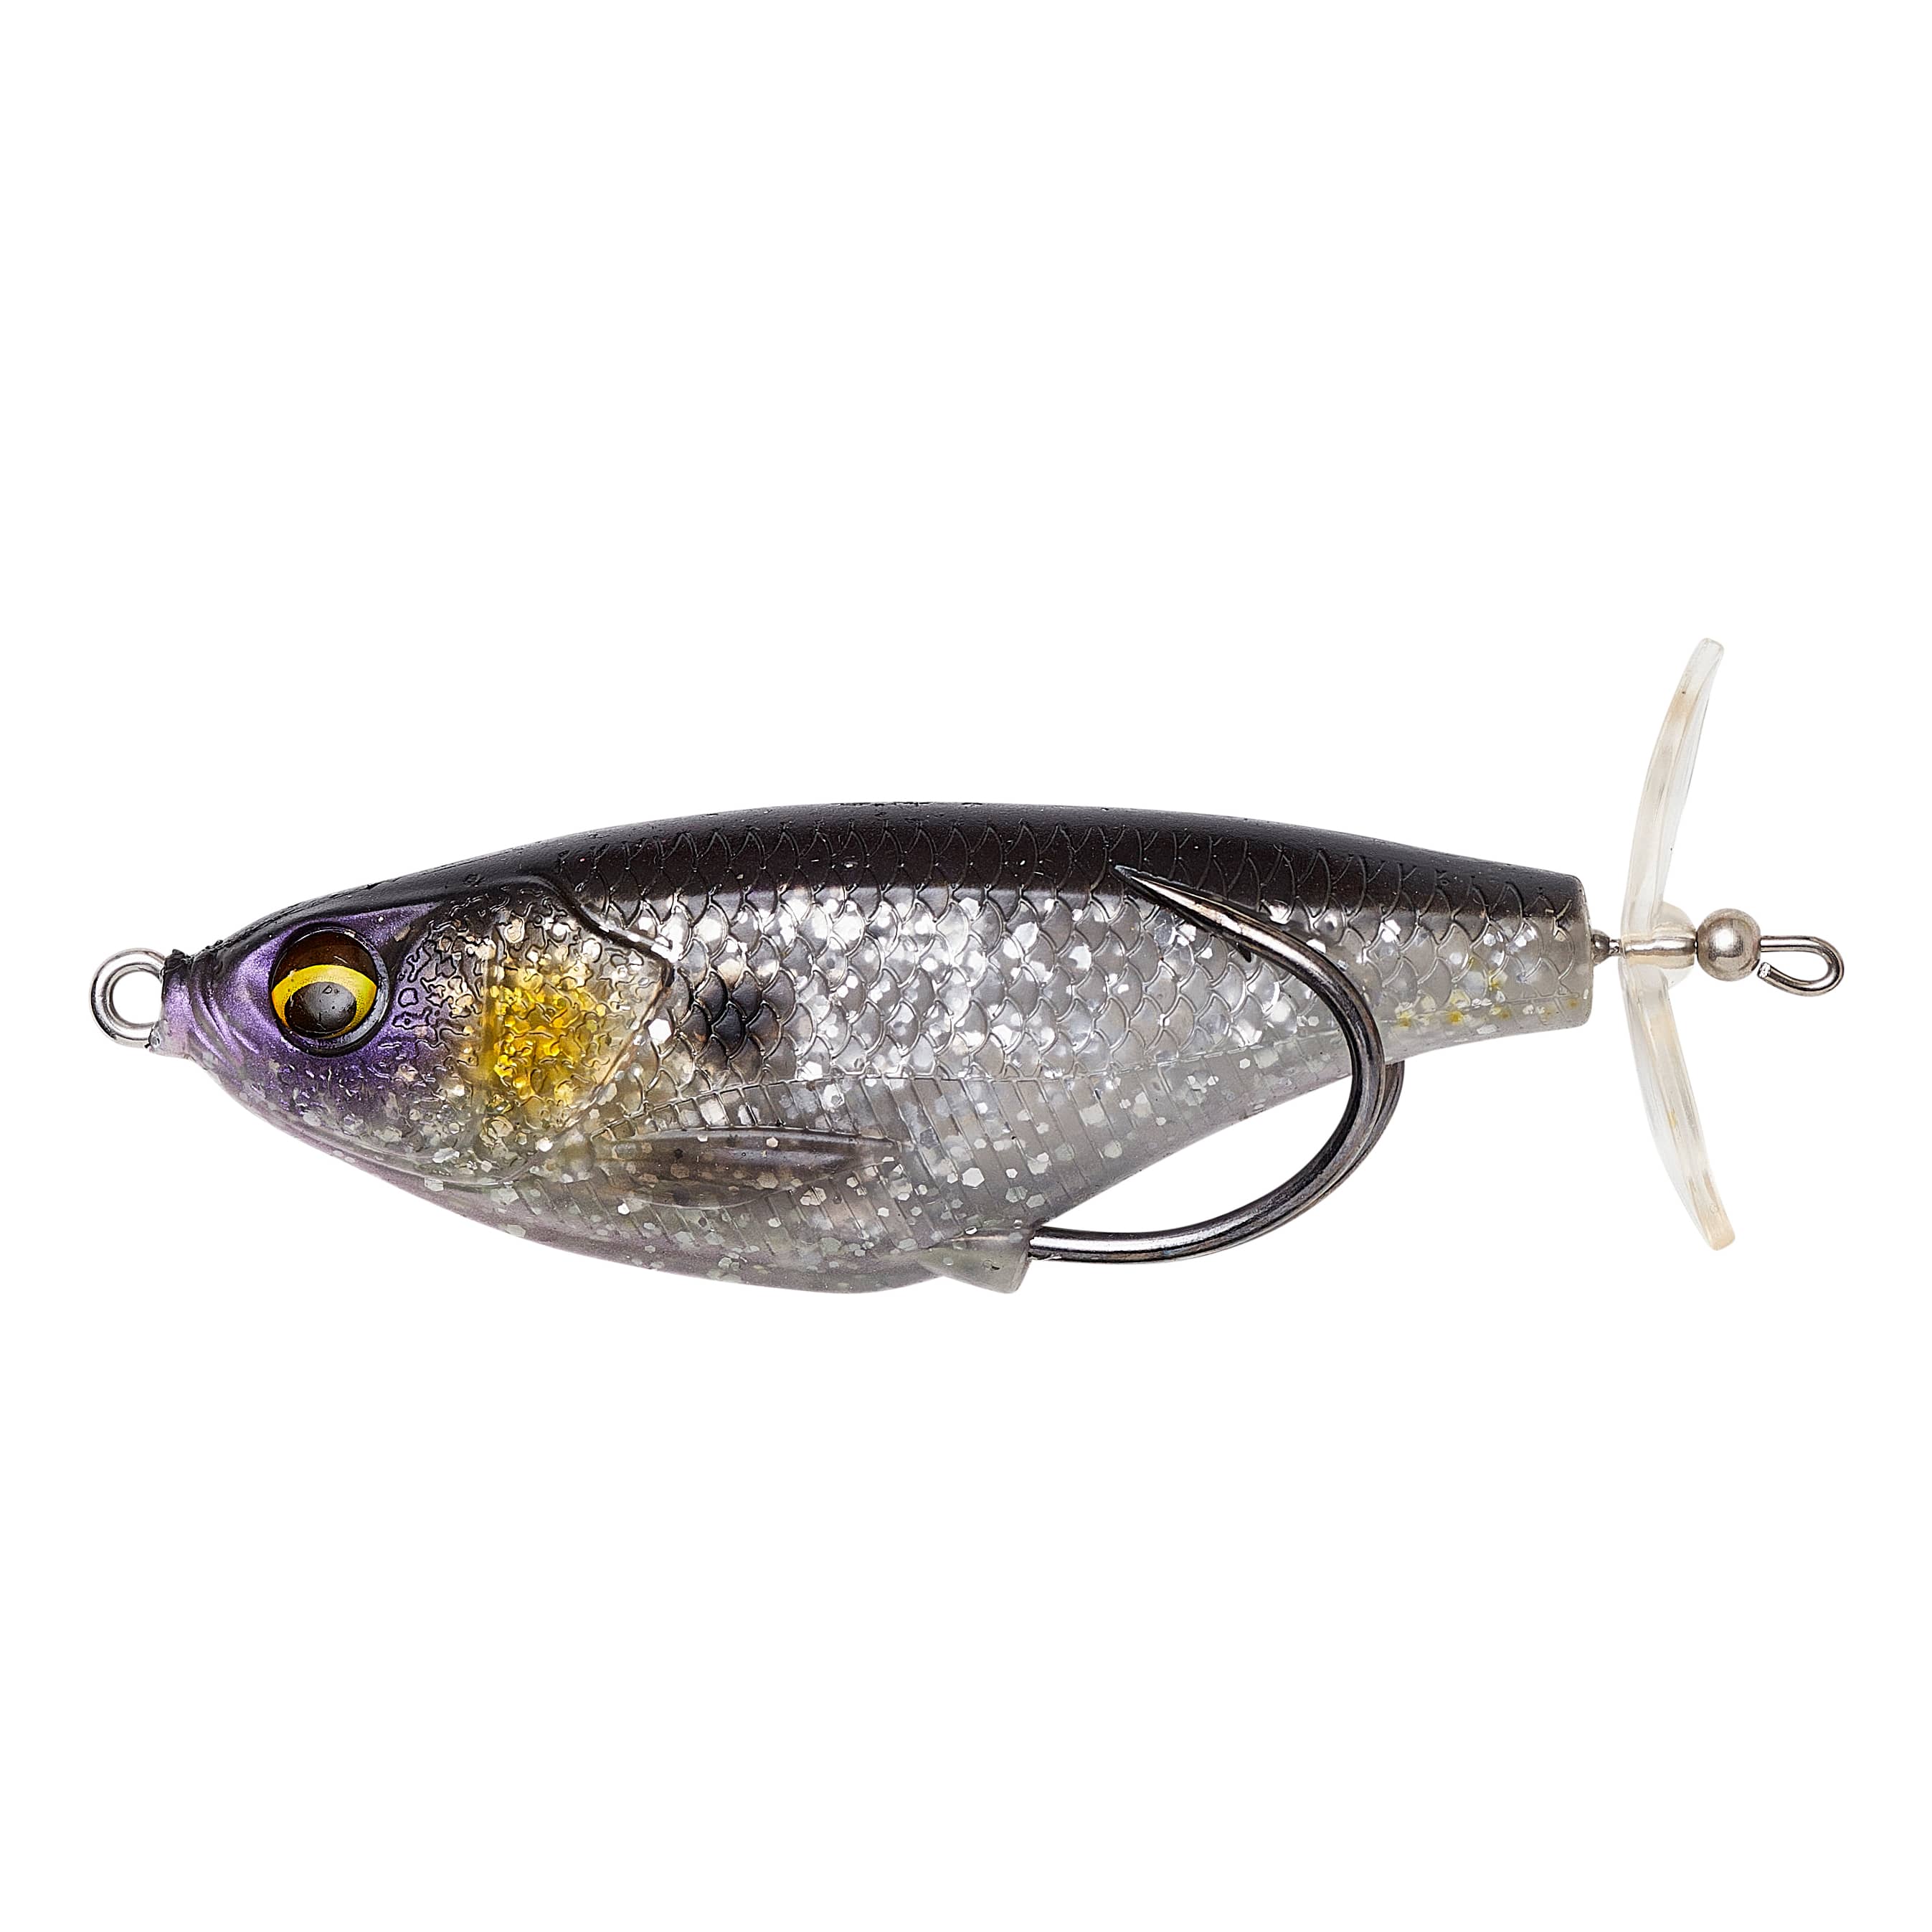 Angling International - Have That! Lunkerhunt's ICAST award winning topwater  lure, the 'Phantom Spider' just keeps catching fish. It's ultra realistic  profile and action really stirs those fish into whacking it out